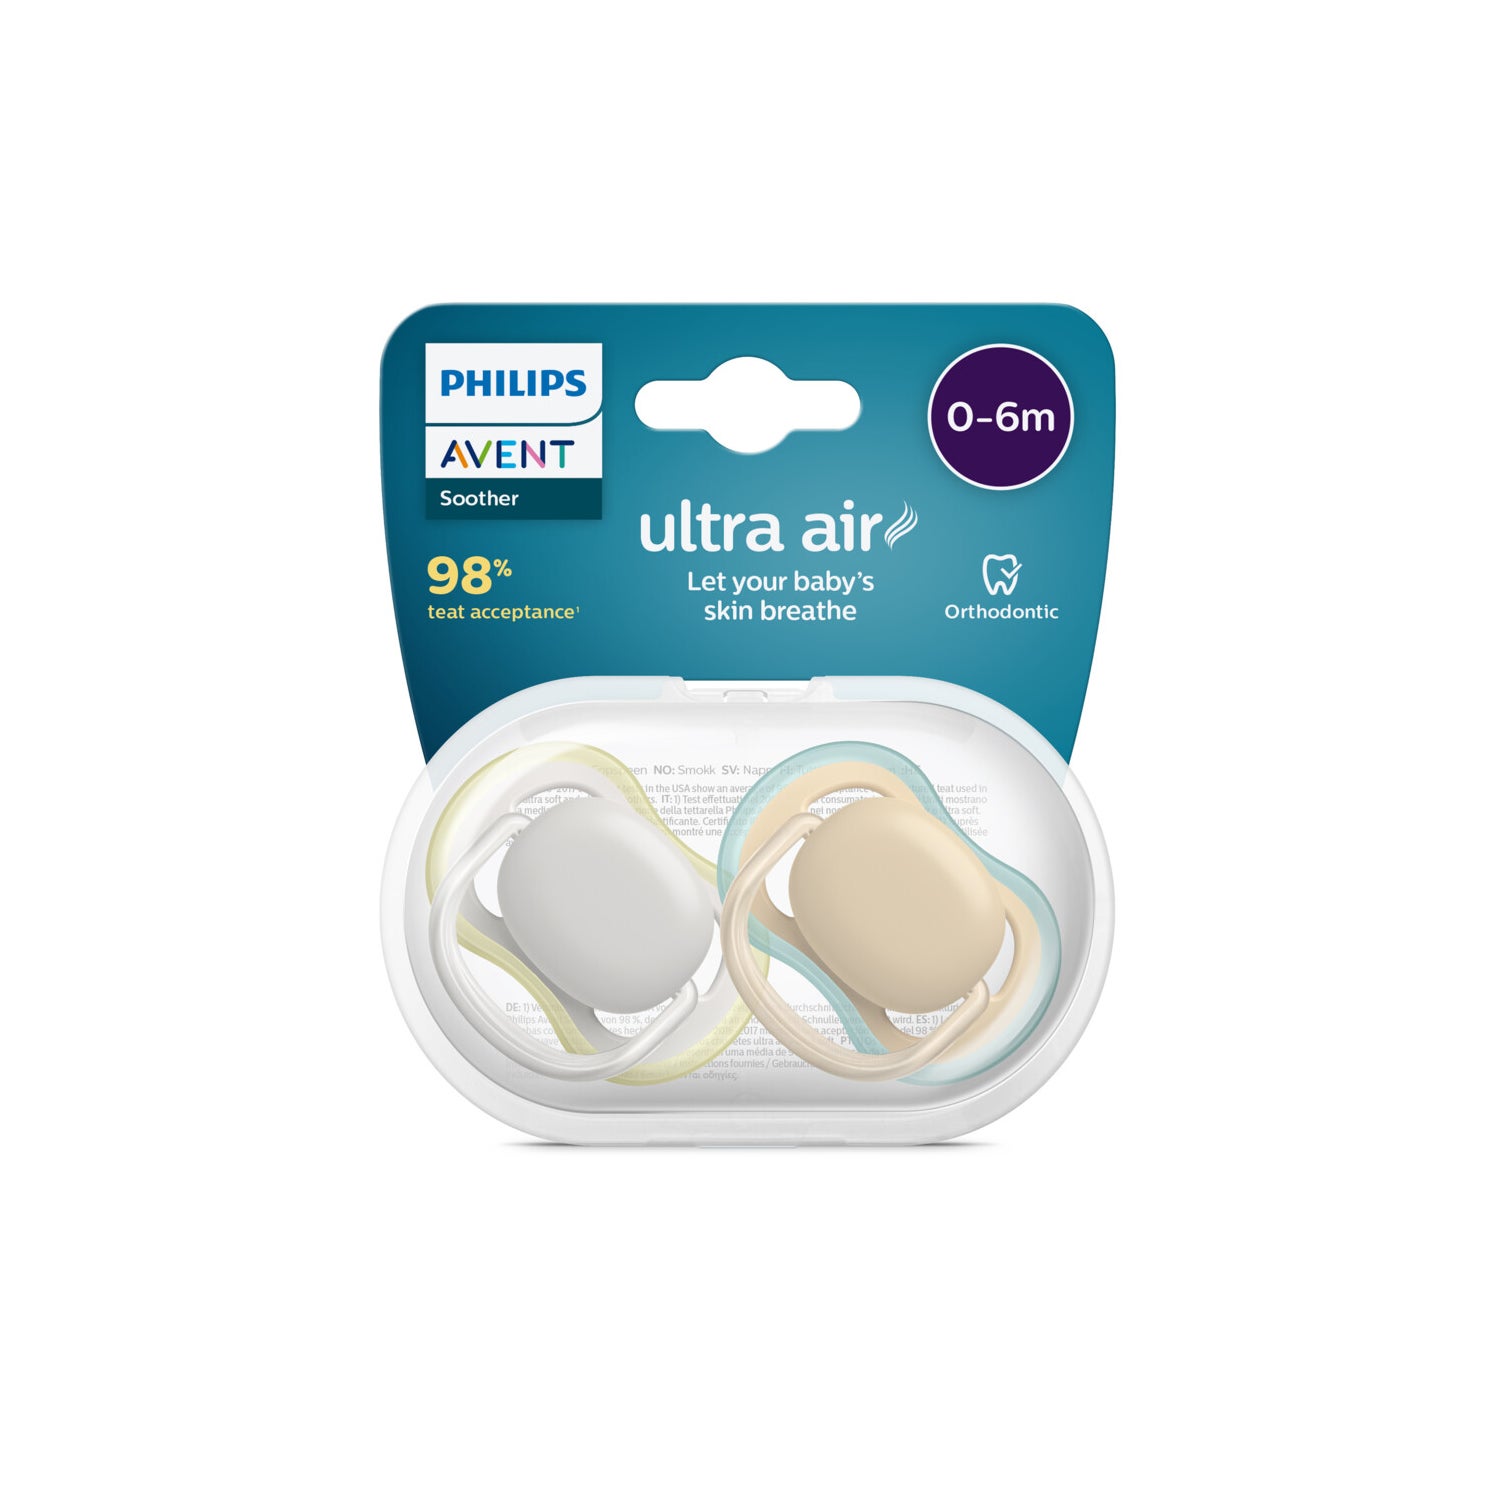 Philips Avent Chupete Ultra Air 0-6Meses Neutro 2uds